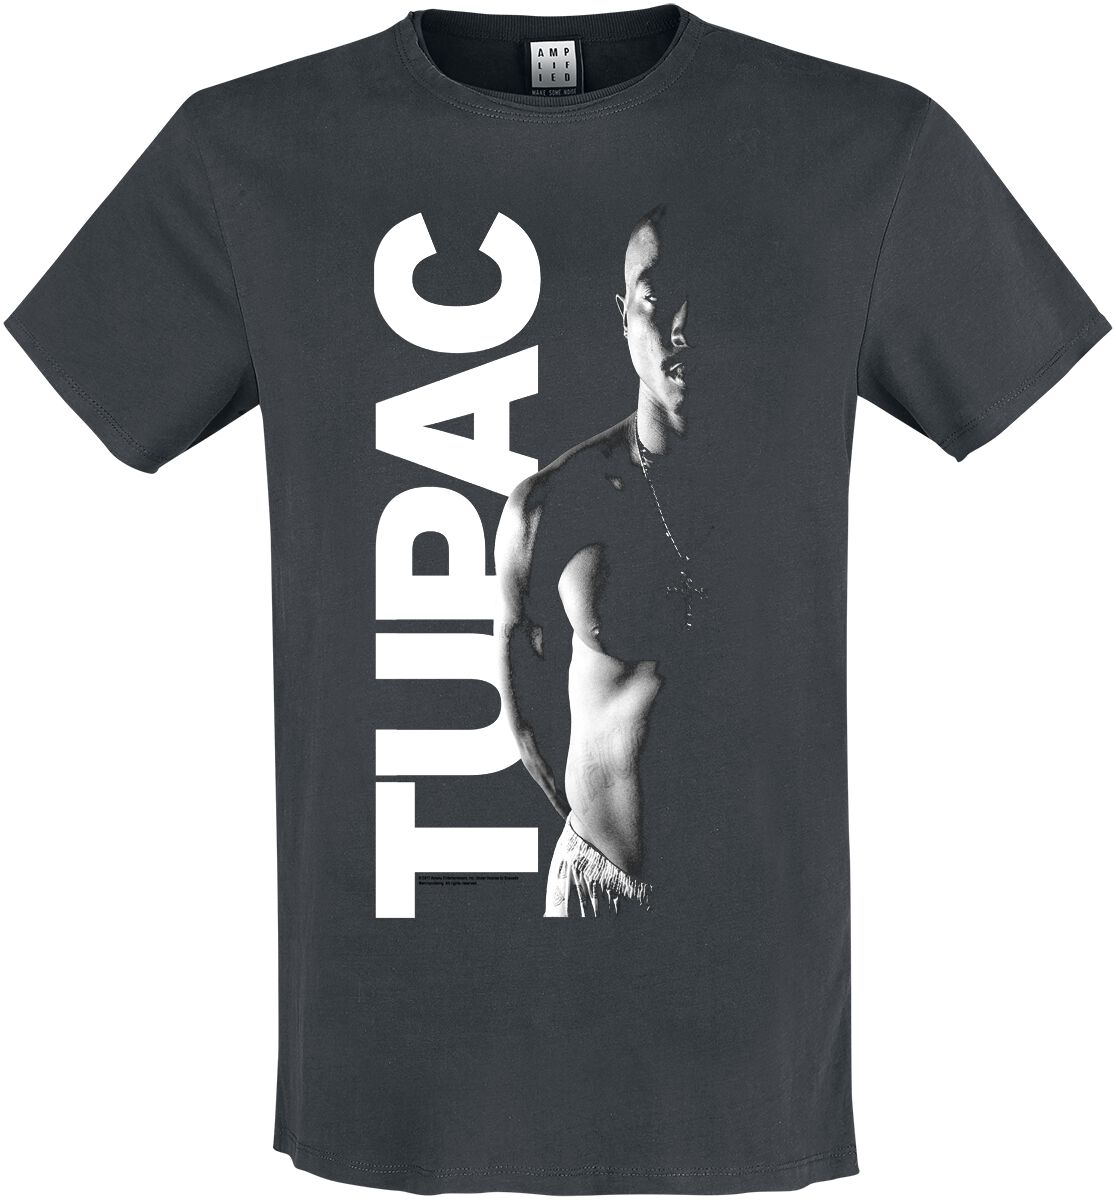 Tupac Shakur Amplified Collection - Shakur T-Shirt charcoal in 3XL